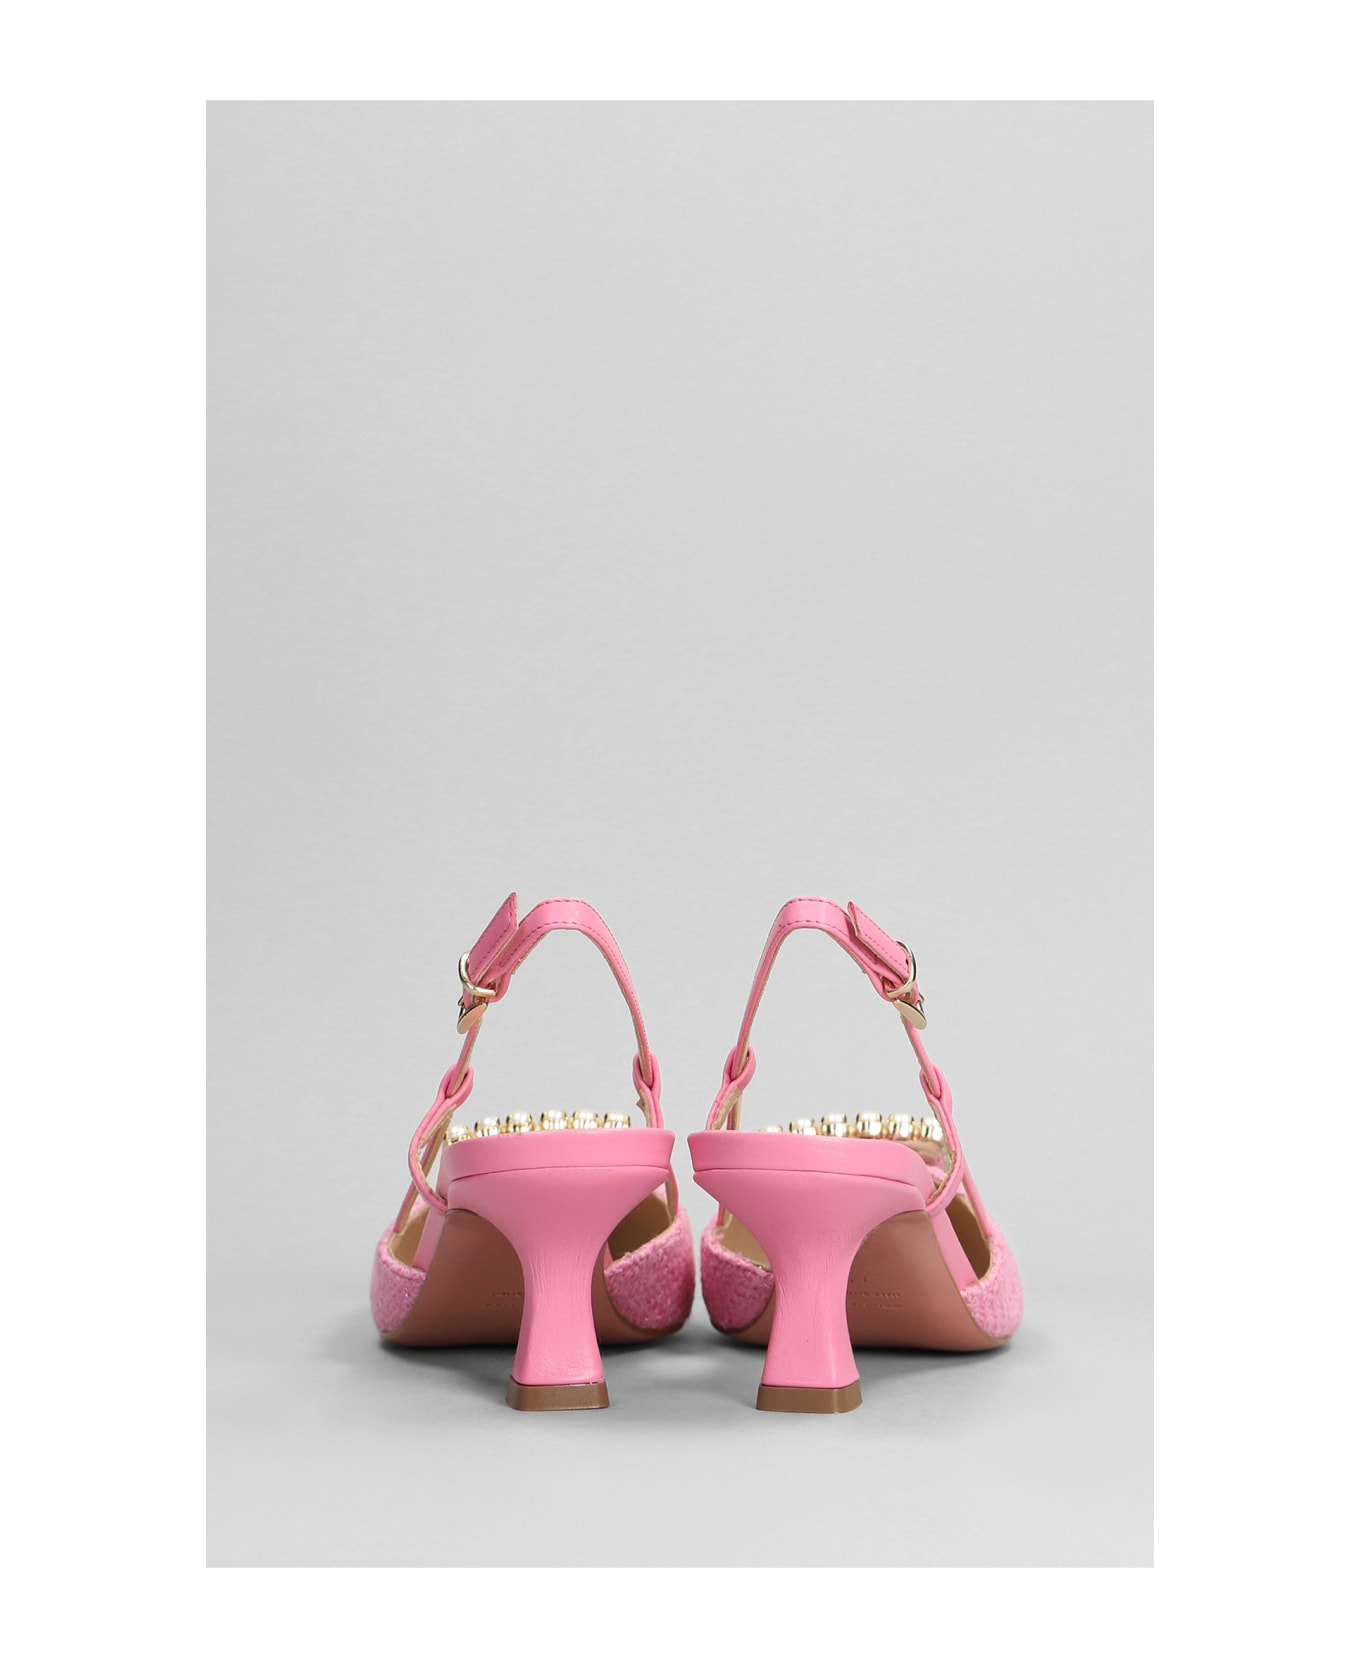 Roberto Festa Stefi Pumps In Rose-pink Leather And Fabric - rose-pink ハイヒール